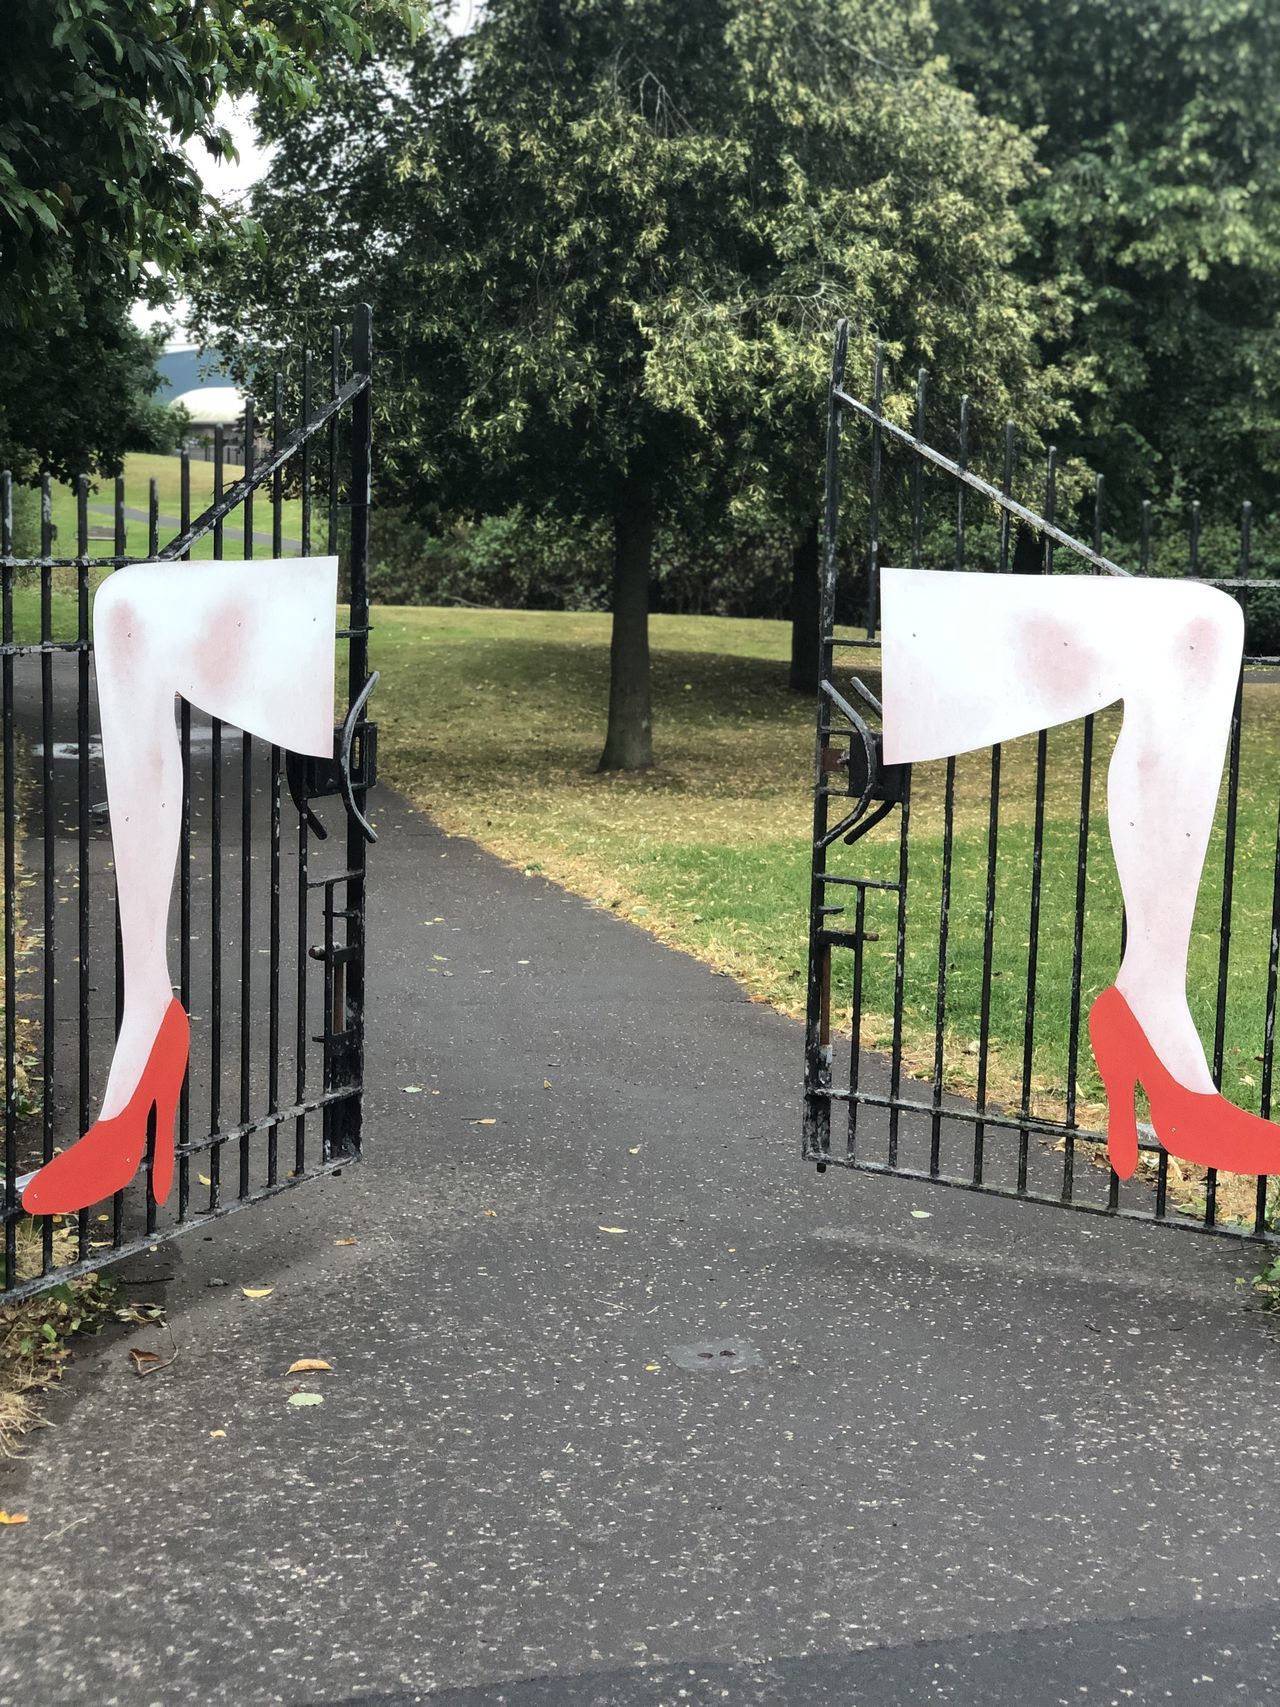 'Upsetting' artwork featuring a women’s spread legs installed at Festival Park, Glasgow.